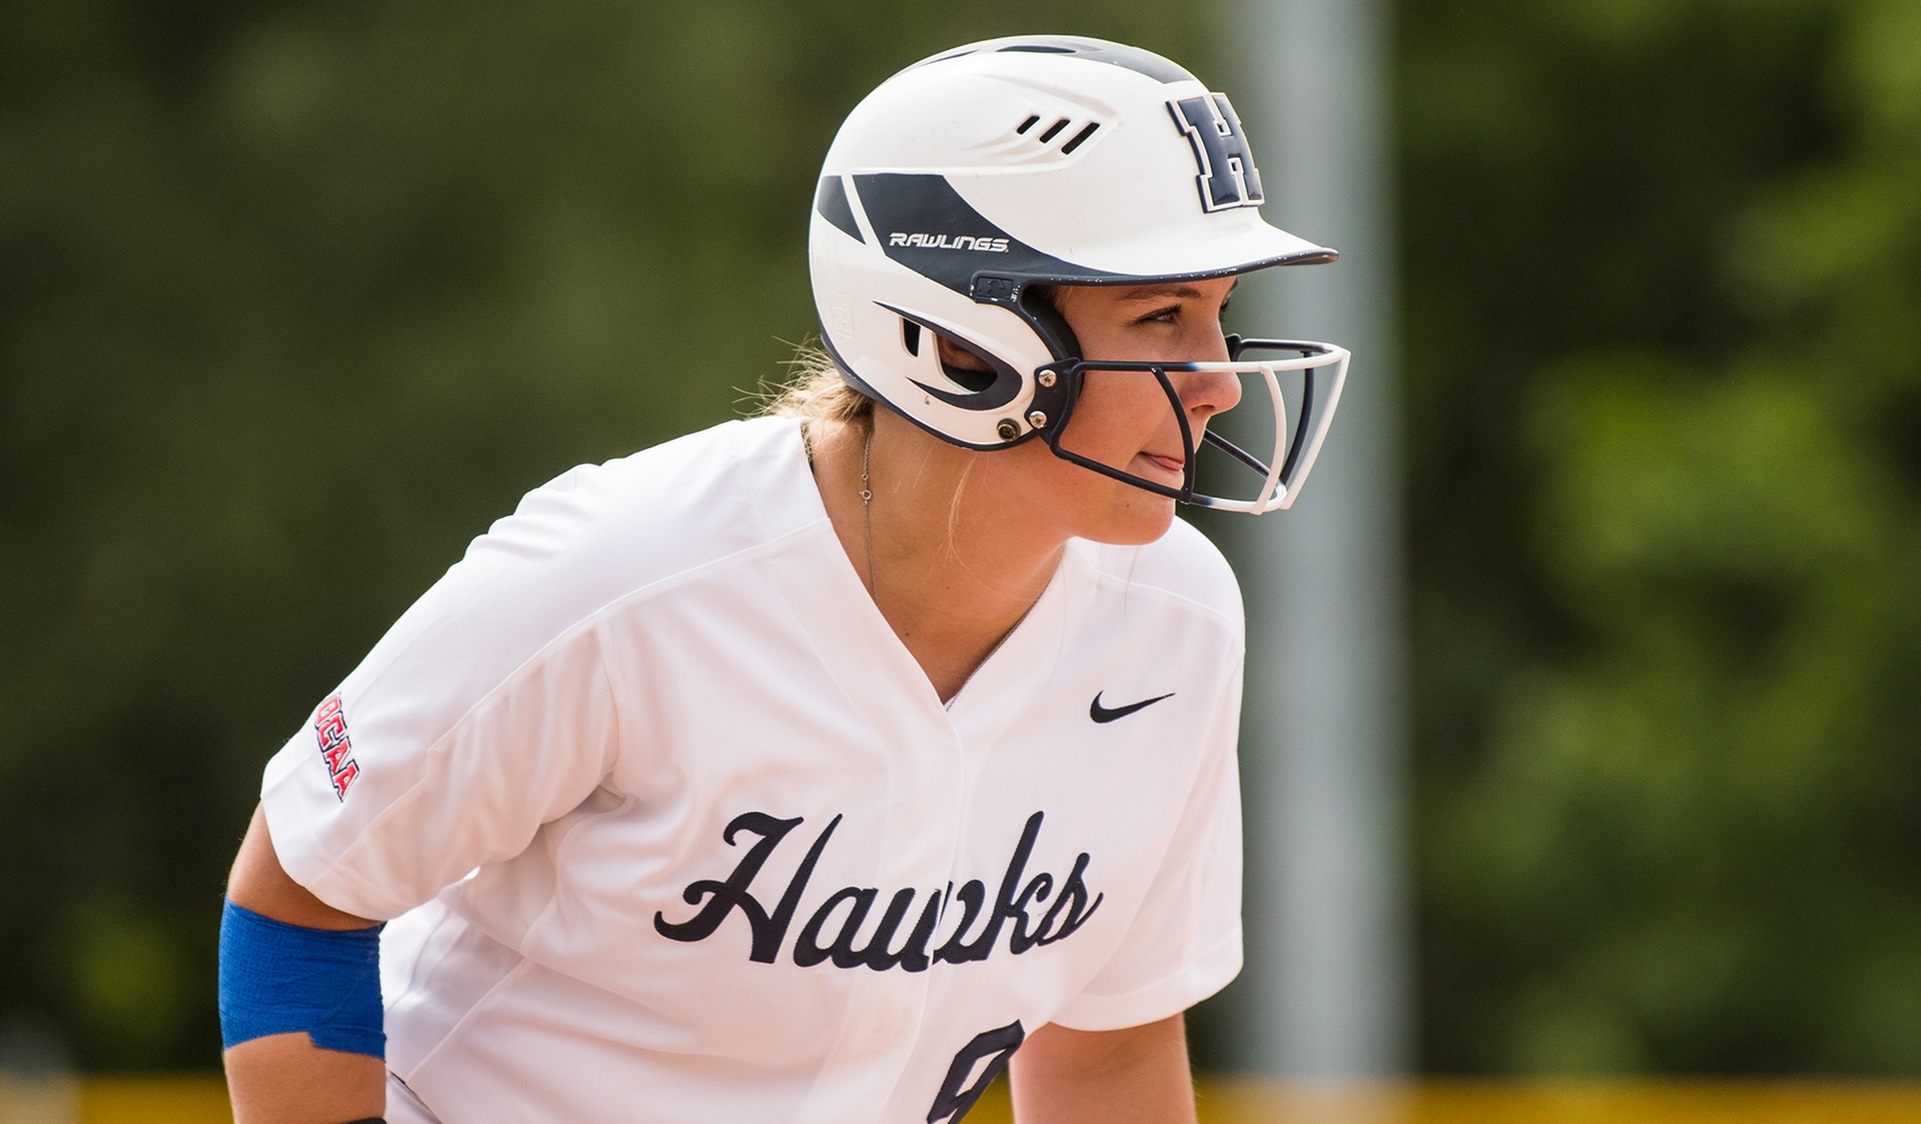 HAWKS UNDEFEATED IN OPENING WEEKEND WITH SWEEP OF MOHAWK